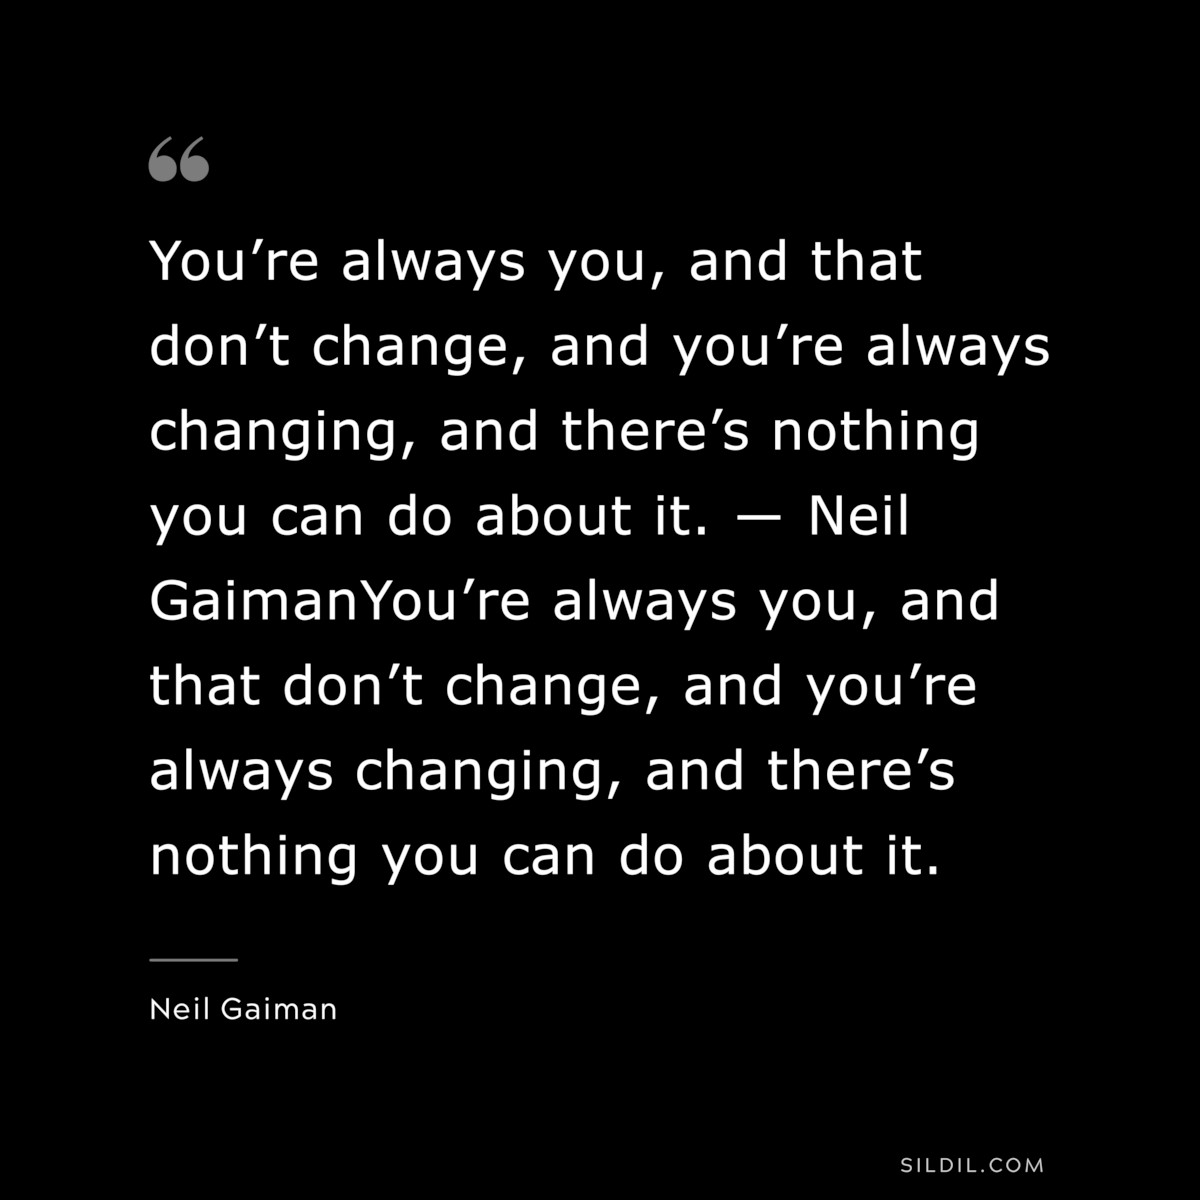 You’re always you, and that don’t change, and you’re always changing, and there’s nothing you can do about it. ― Neil GaimanYou’re always you, and that don’t change, and you’re always changing, and there’s nothing you can do about it. ― Neil Gaiman